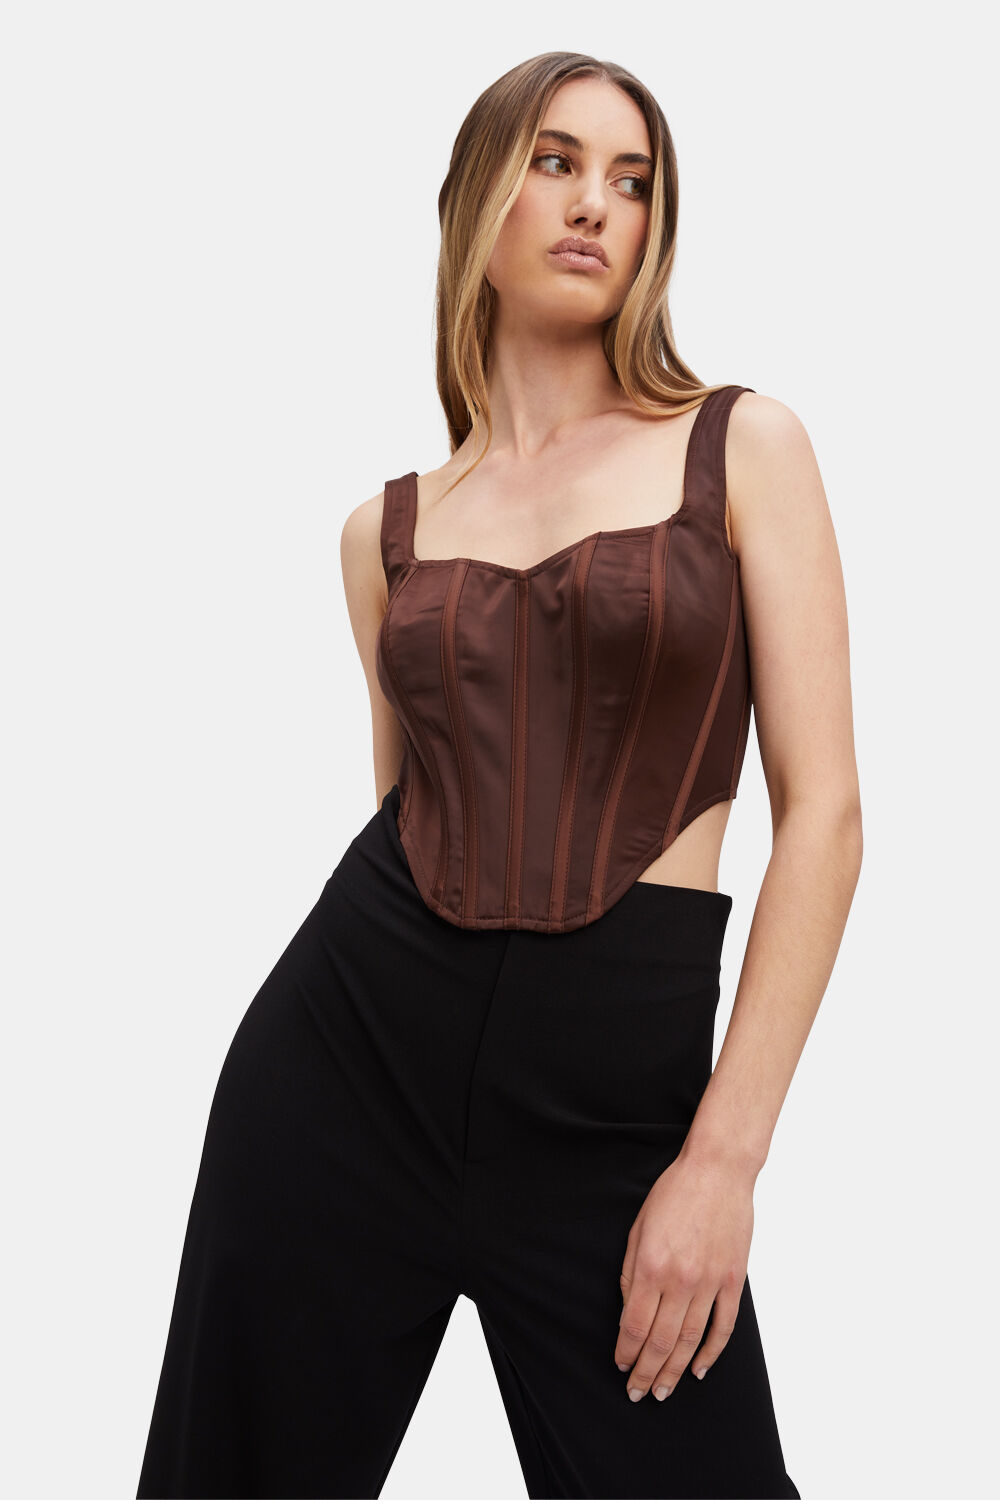 SATIN CORSET BUSTIER in colour CHOCOLATE BROWN